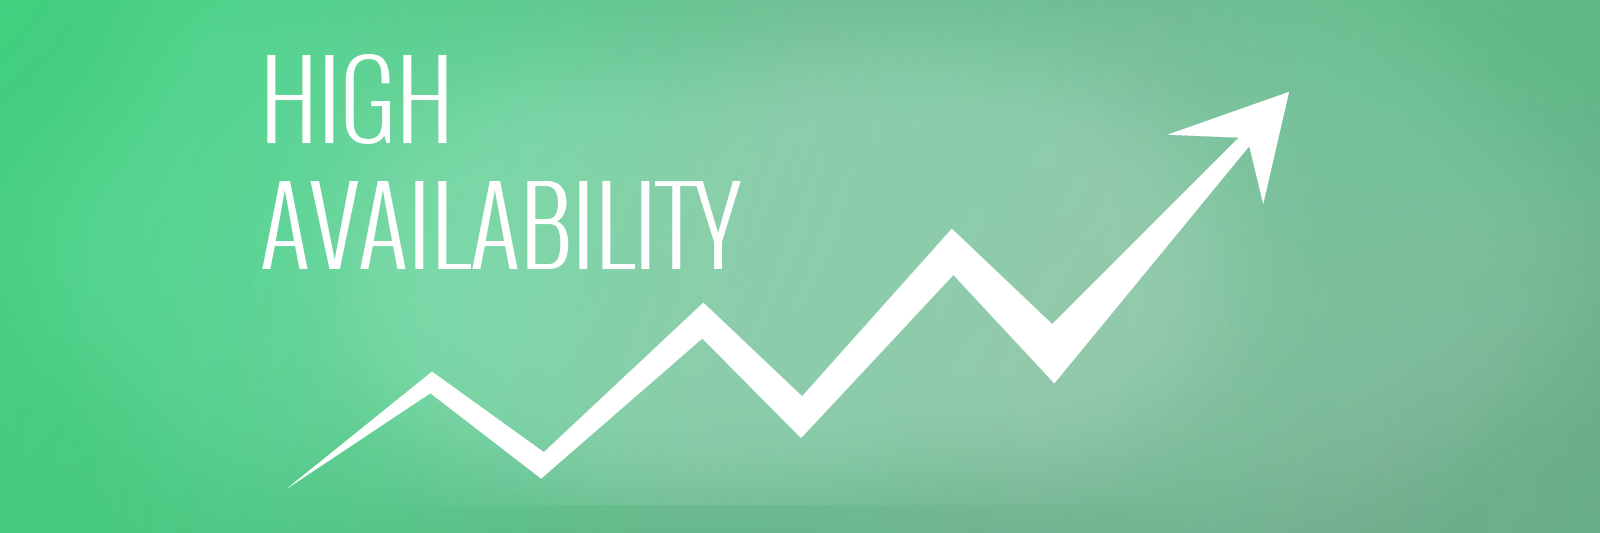 Availability Meaning and Definition